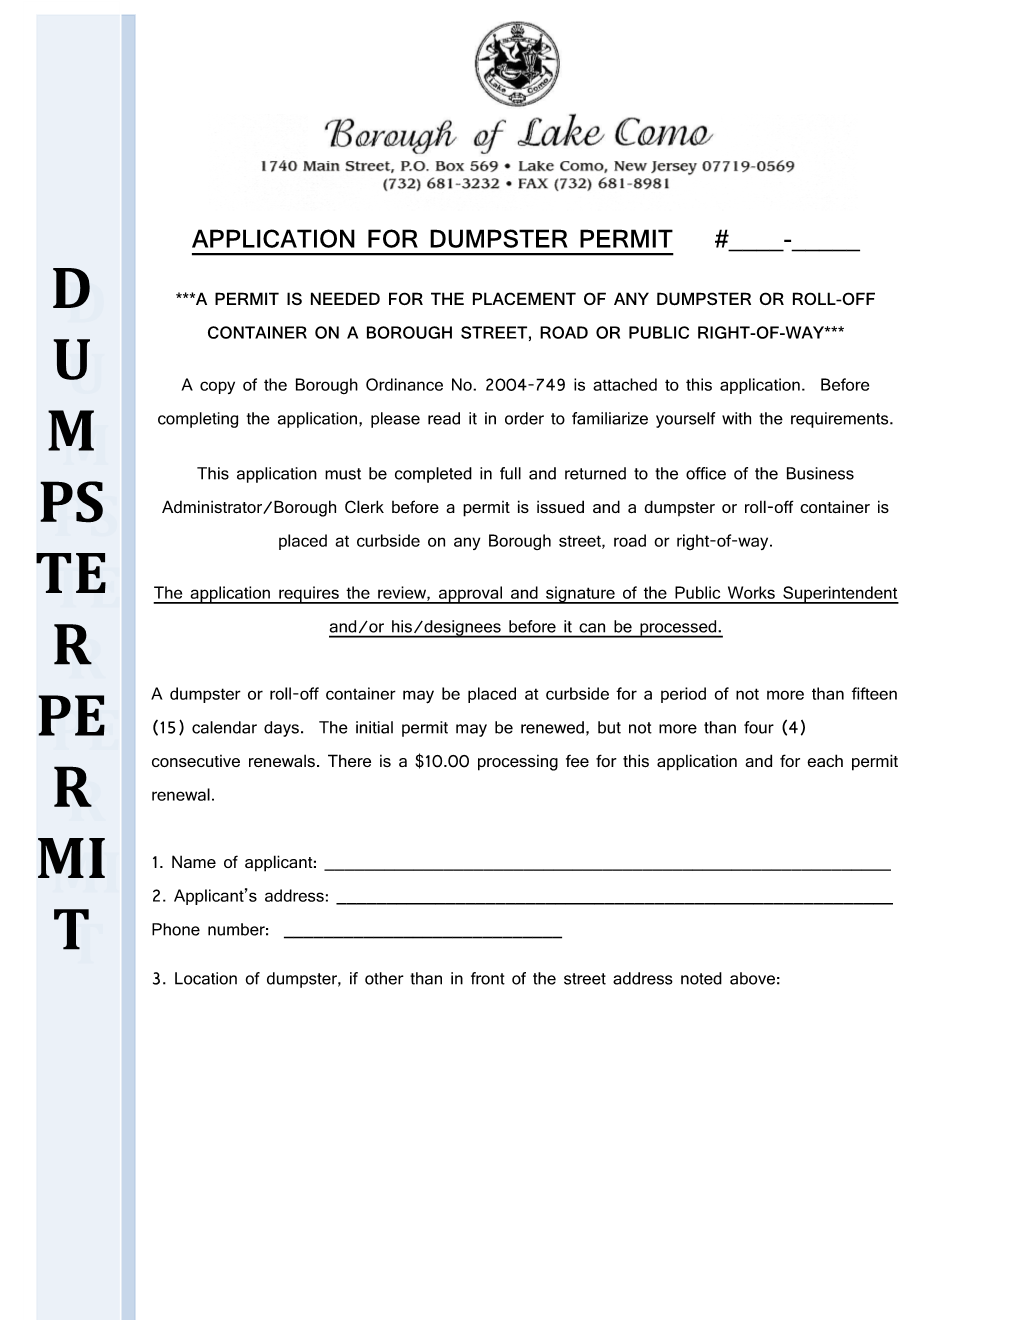 A Permit Is Needed for the Placement of Any Dumpster Or Roll-Off Container on a Borough